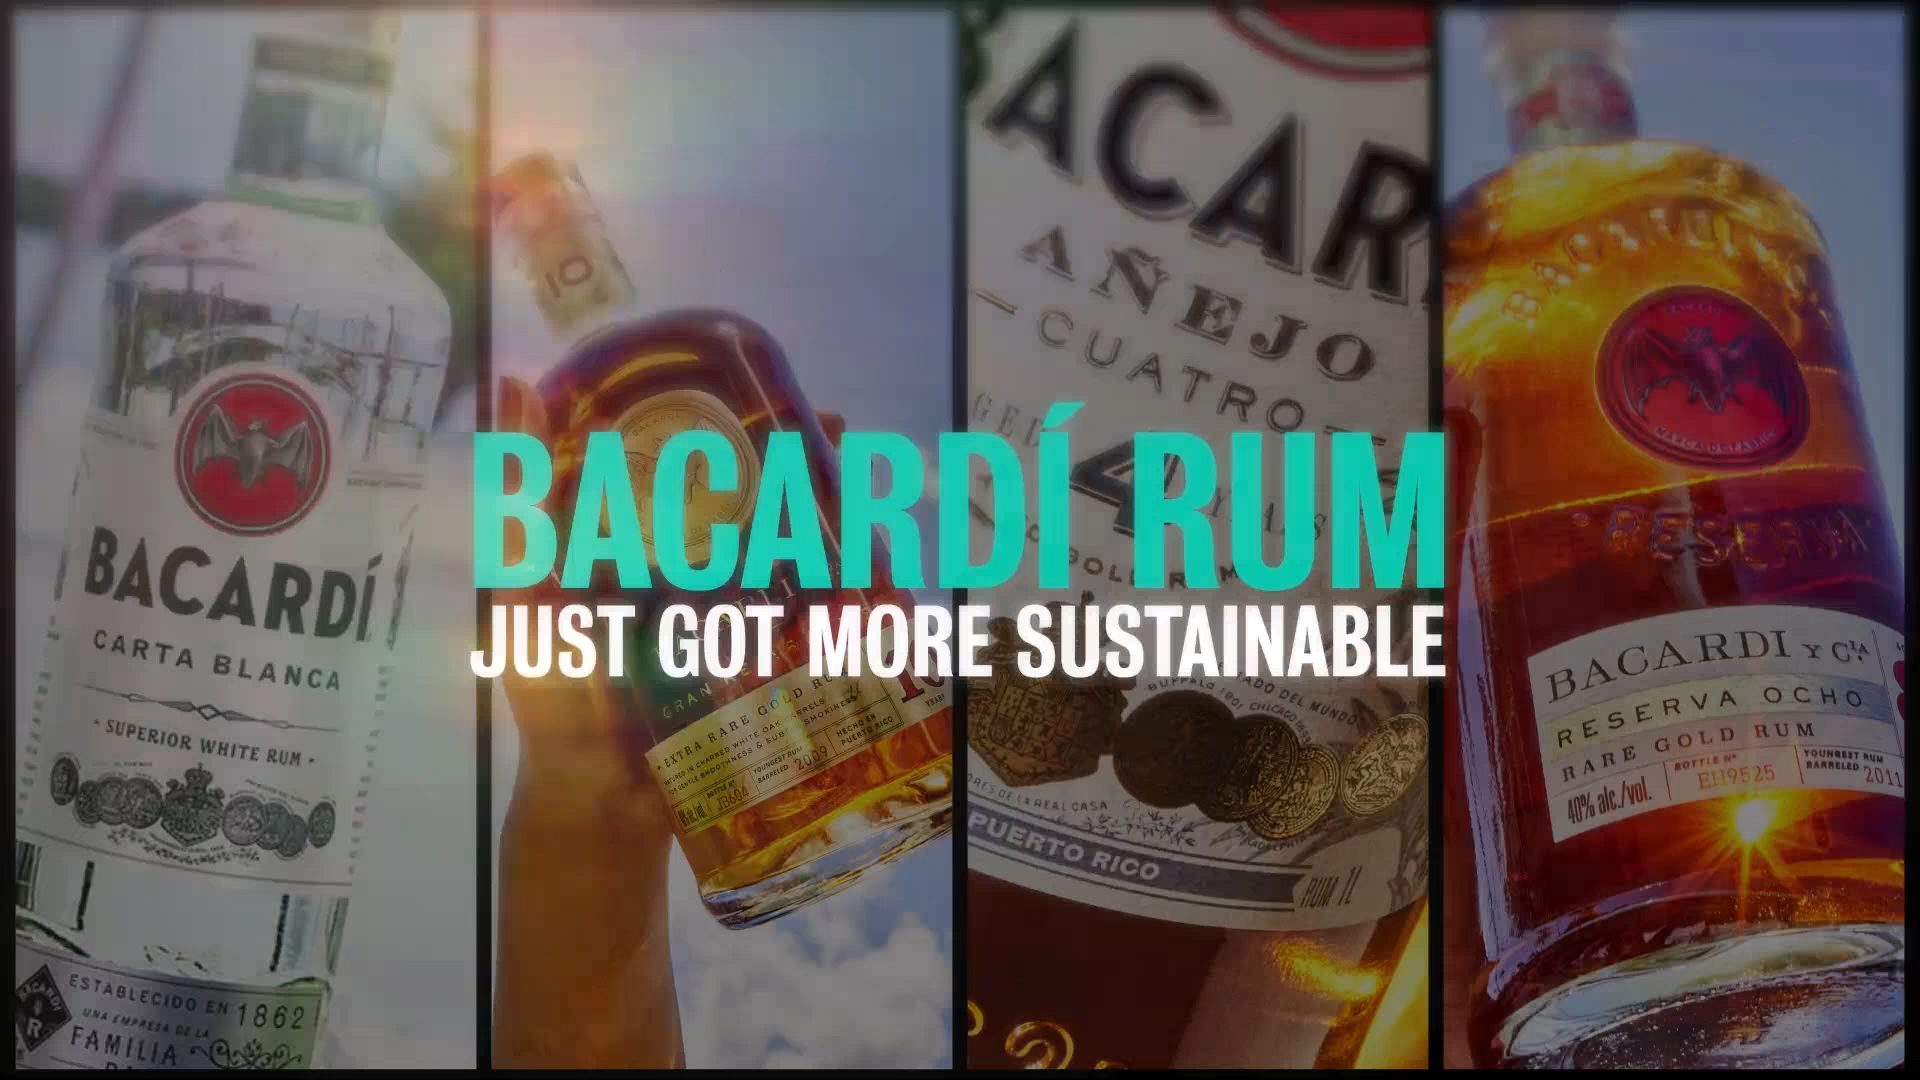 BACARDÍ® RUM CUTS GREENHOUSE GAS EMISSIONS BY 50%